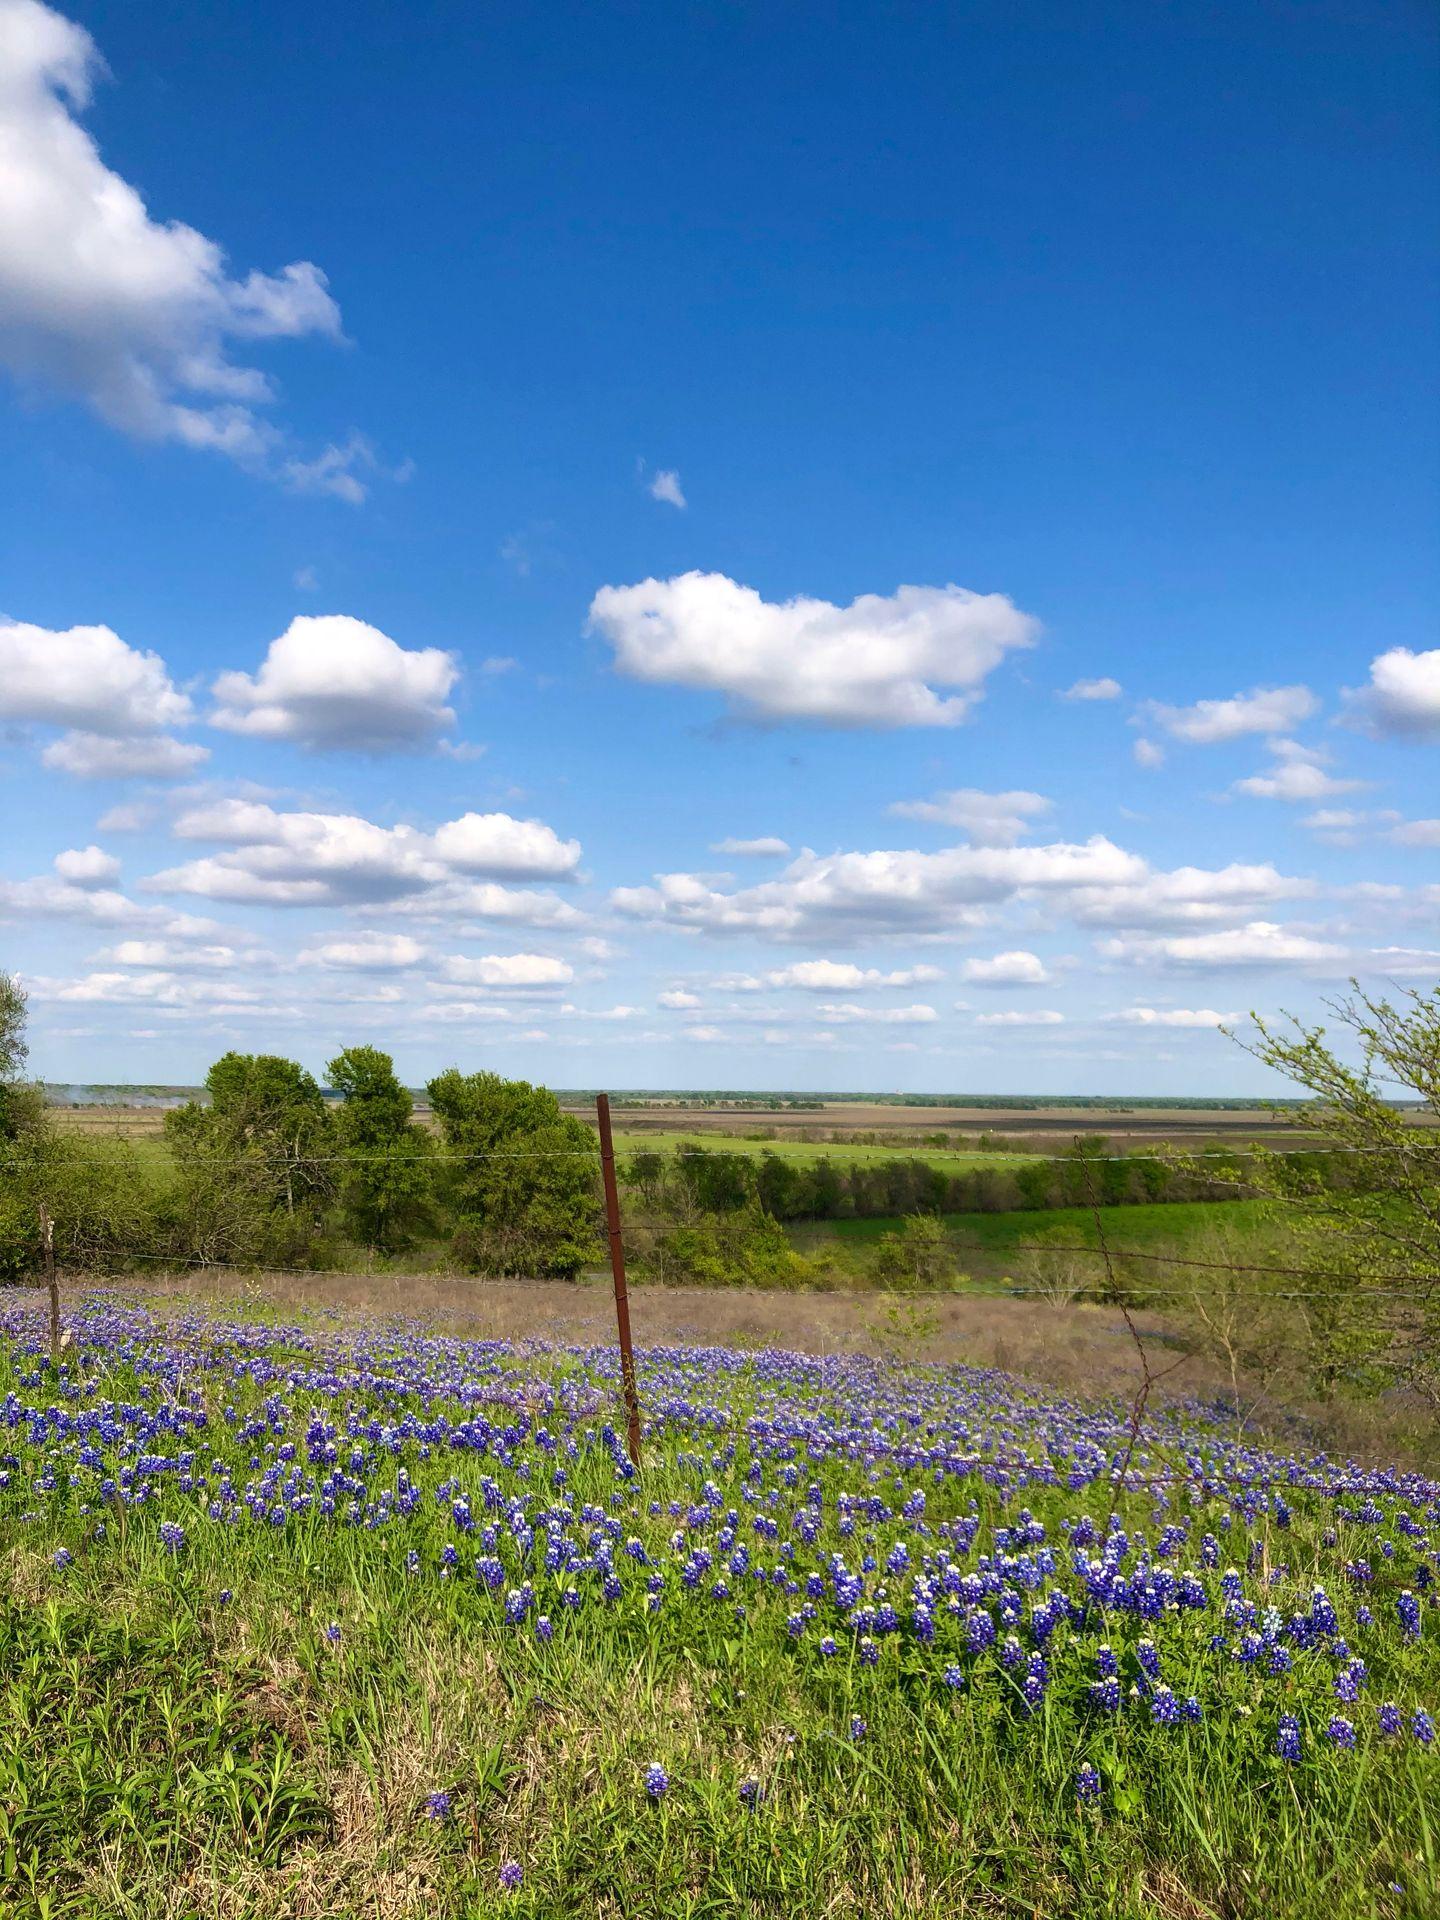 A cluster of bluebonnets in a field with a fence going through them. There are countryside views in the distance.